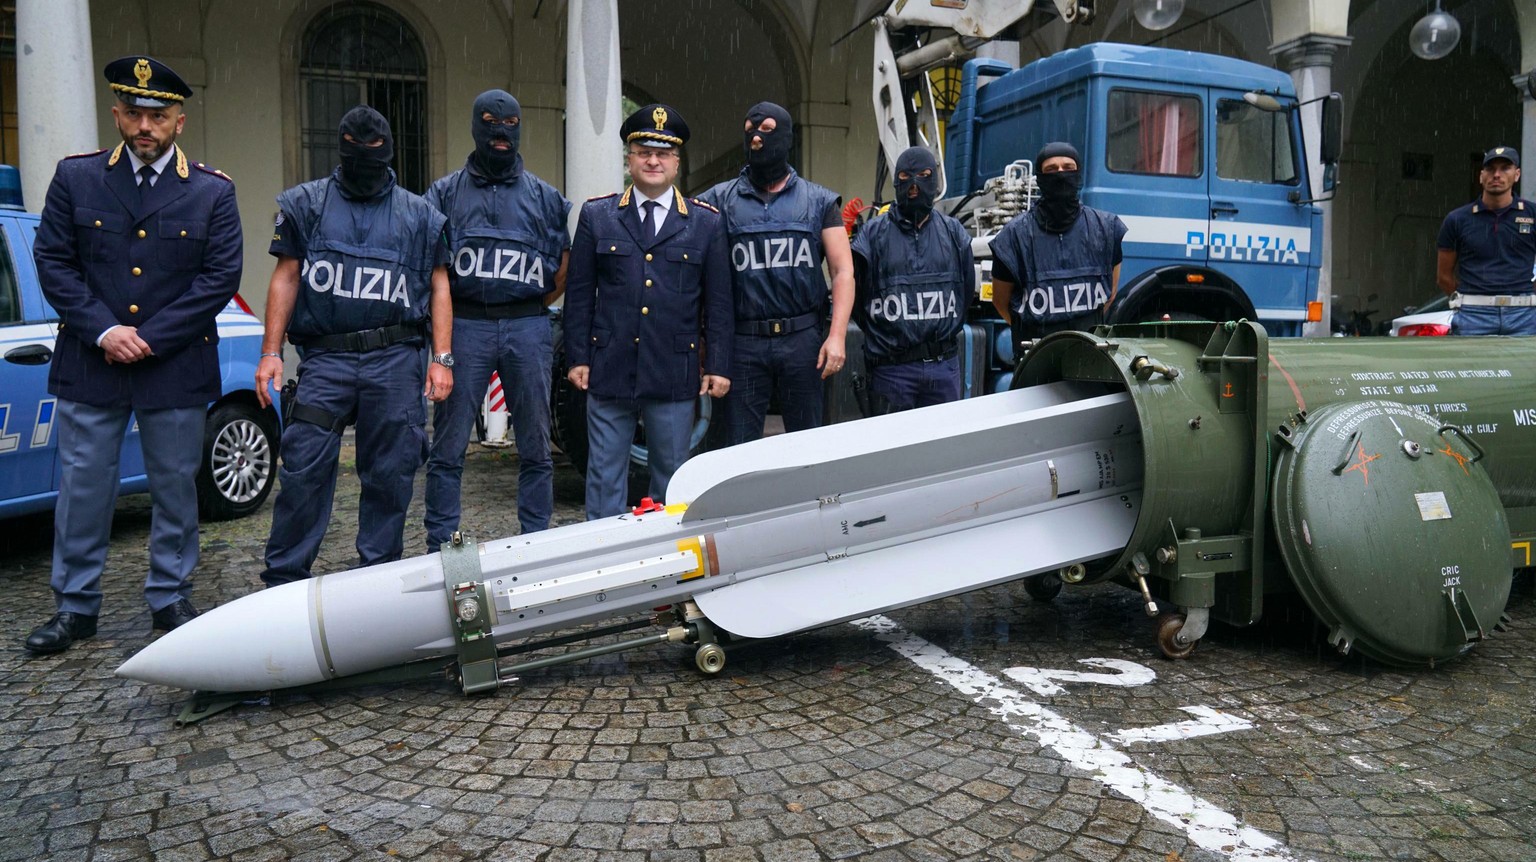 Police stand by a missile seized at an airport hangar near Pavia, northern Italy, following an investigation into Italians who took part in the Russian-backed insurgency in eastern Ukraine, in Turin,  ...